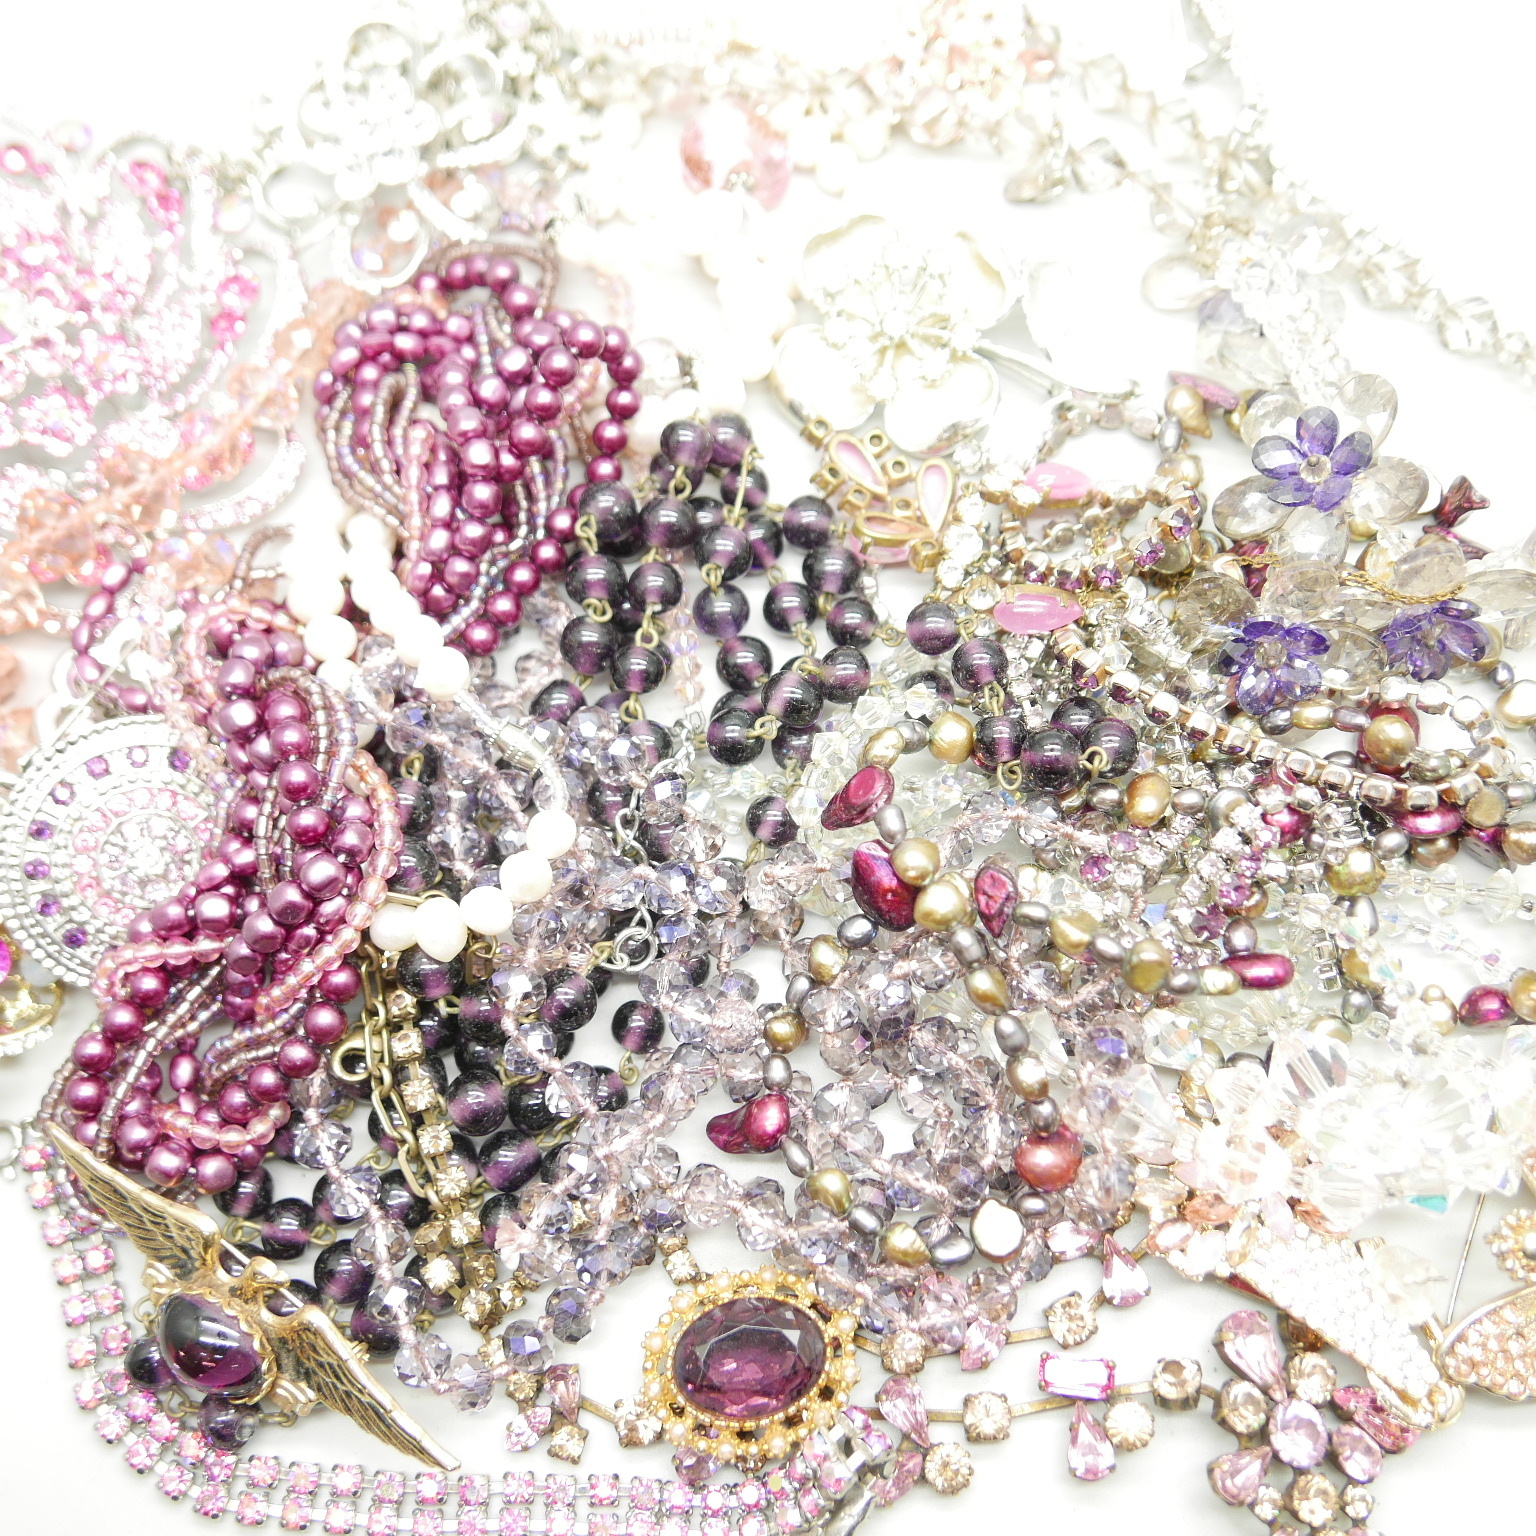 Vintage costume jewellery including coloured pearls and diamante - Image 3 of 3